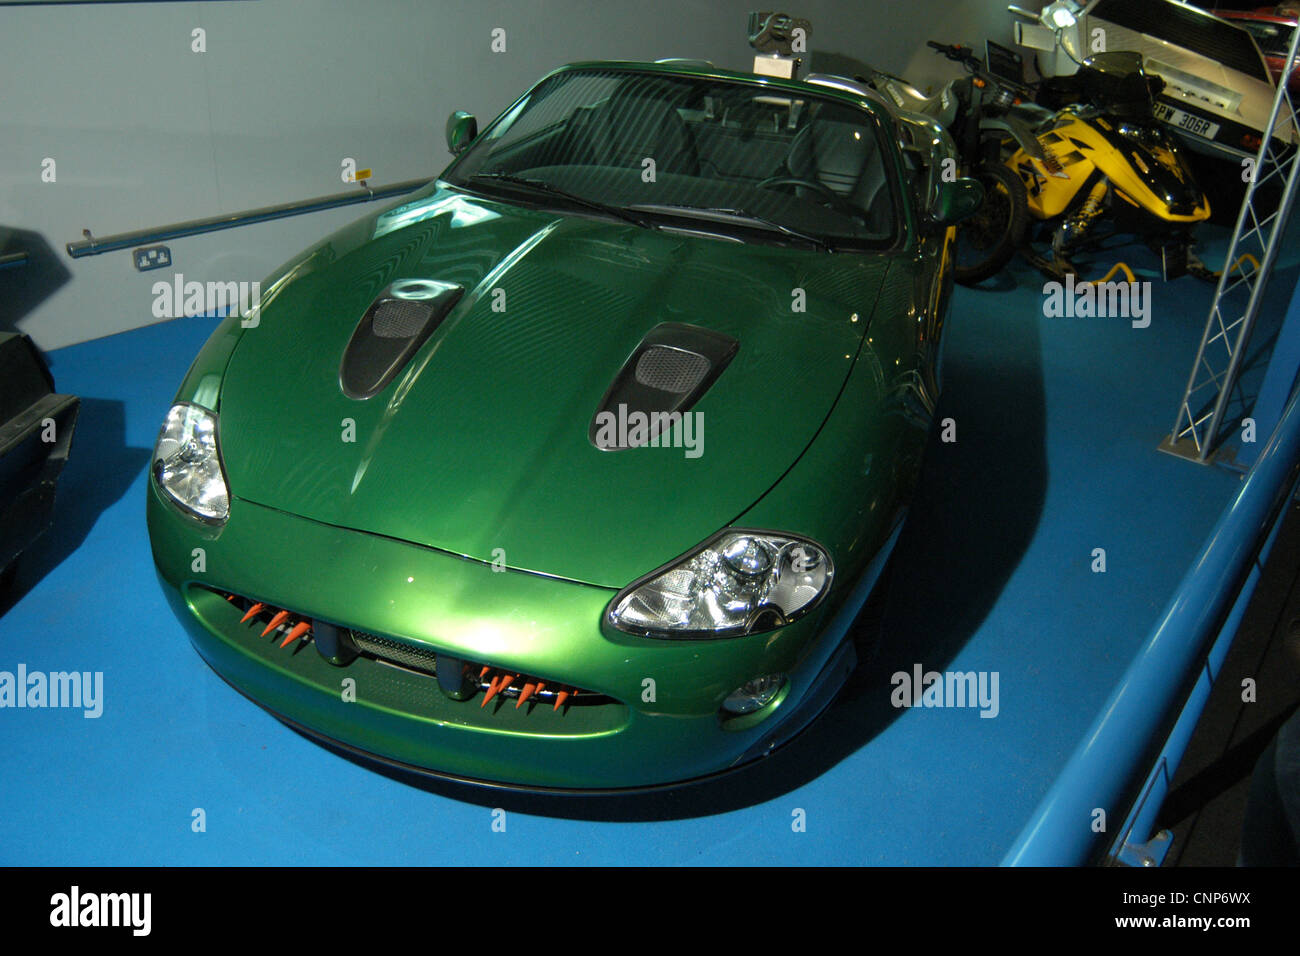 Jaguar XKR Roadster used by James Bond in the film Die Another Day (2002). National Motor Museum, Beaulieu, UK. Stock Photo